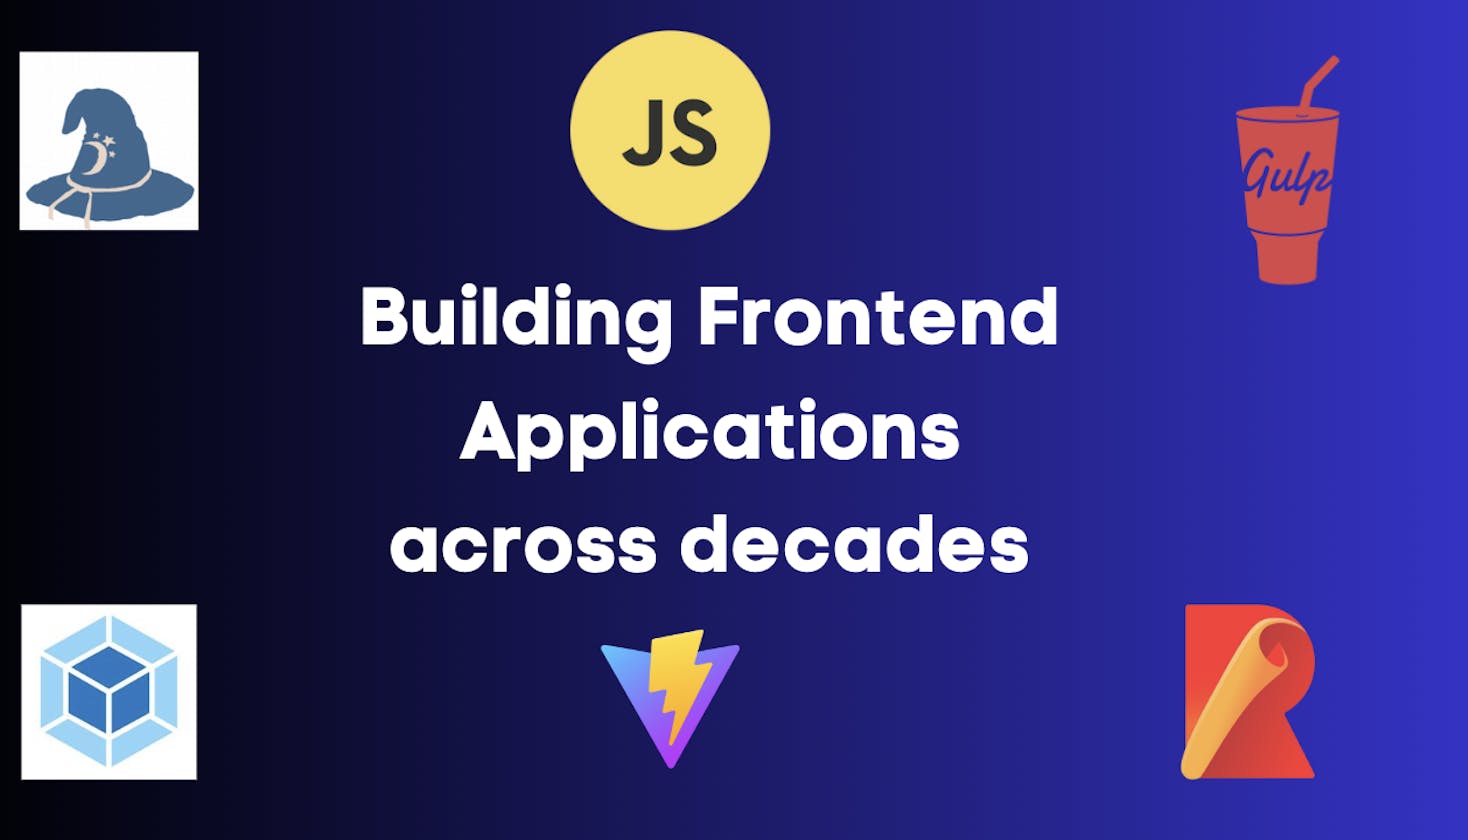 Building Frontend Applications across decades